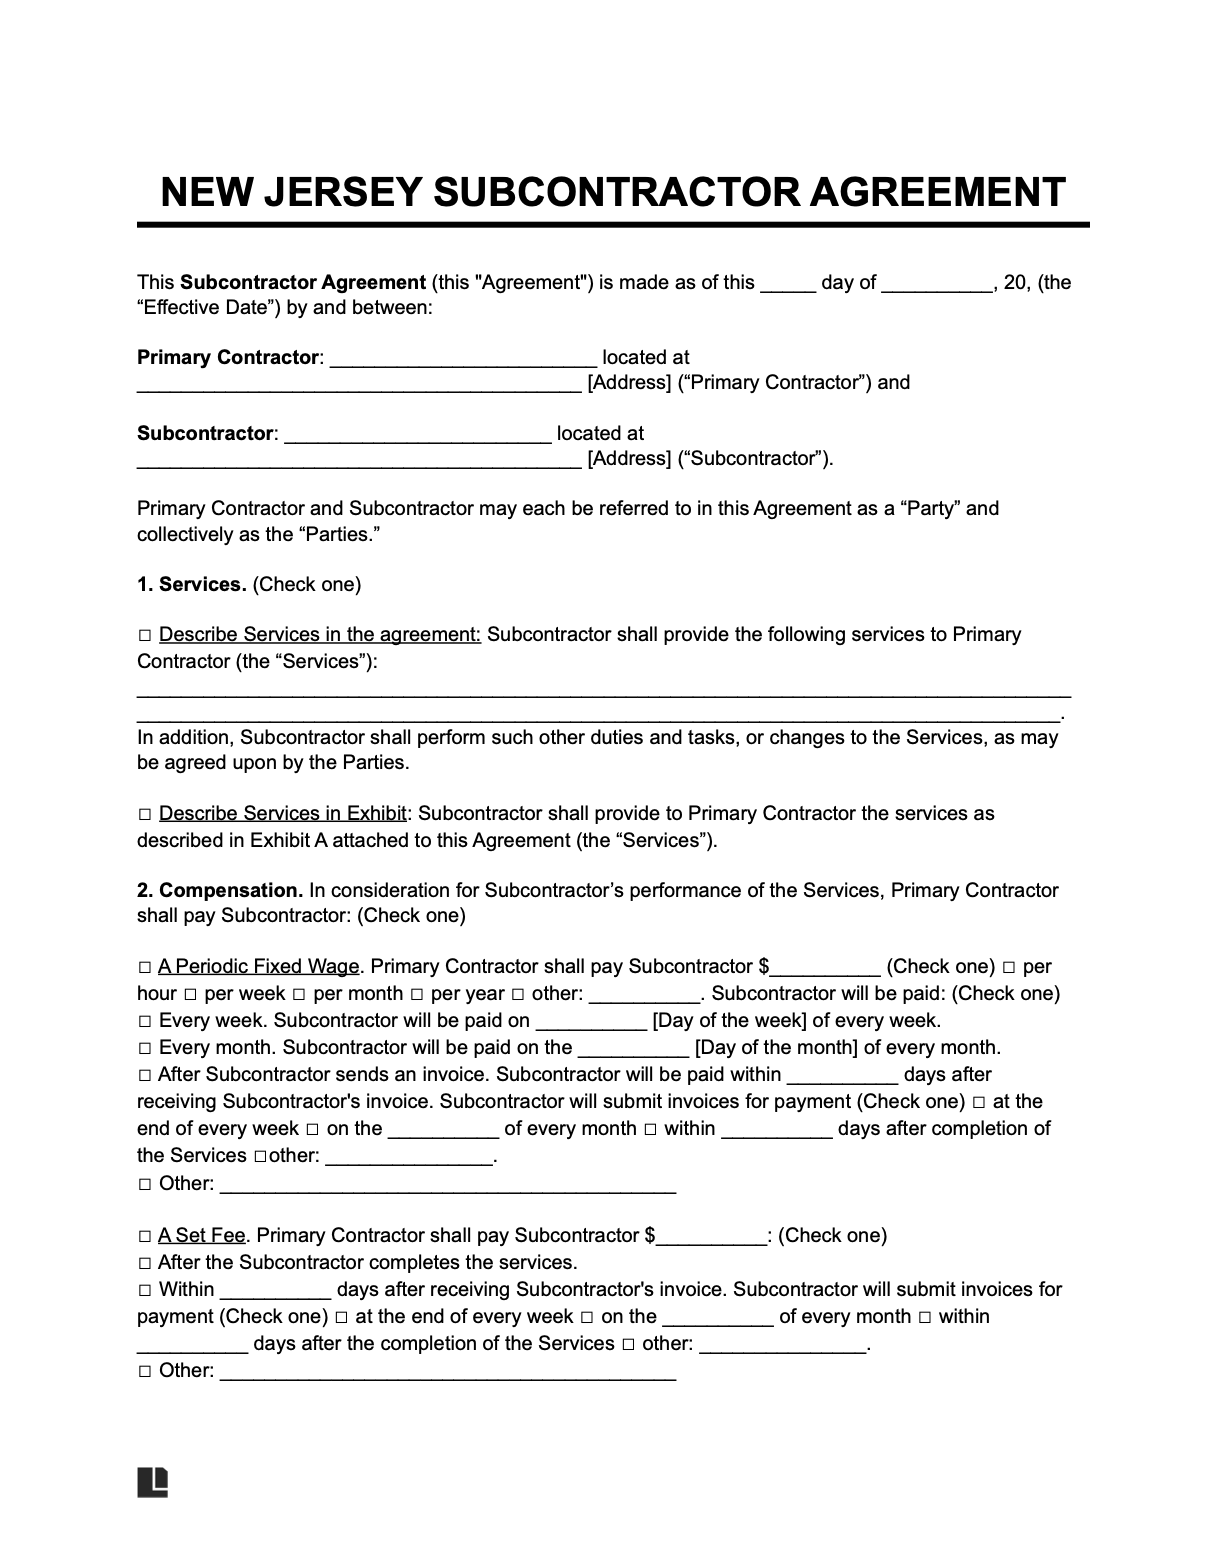 new jersey subcontractor agreement template